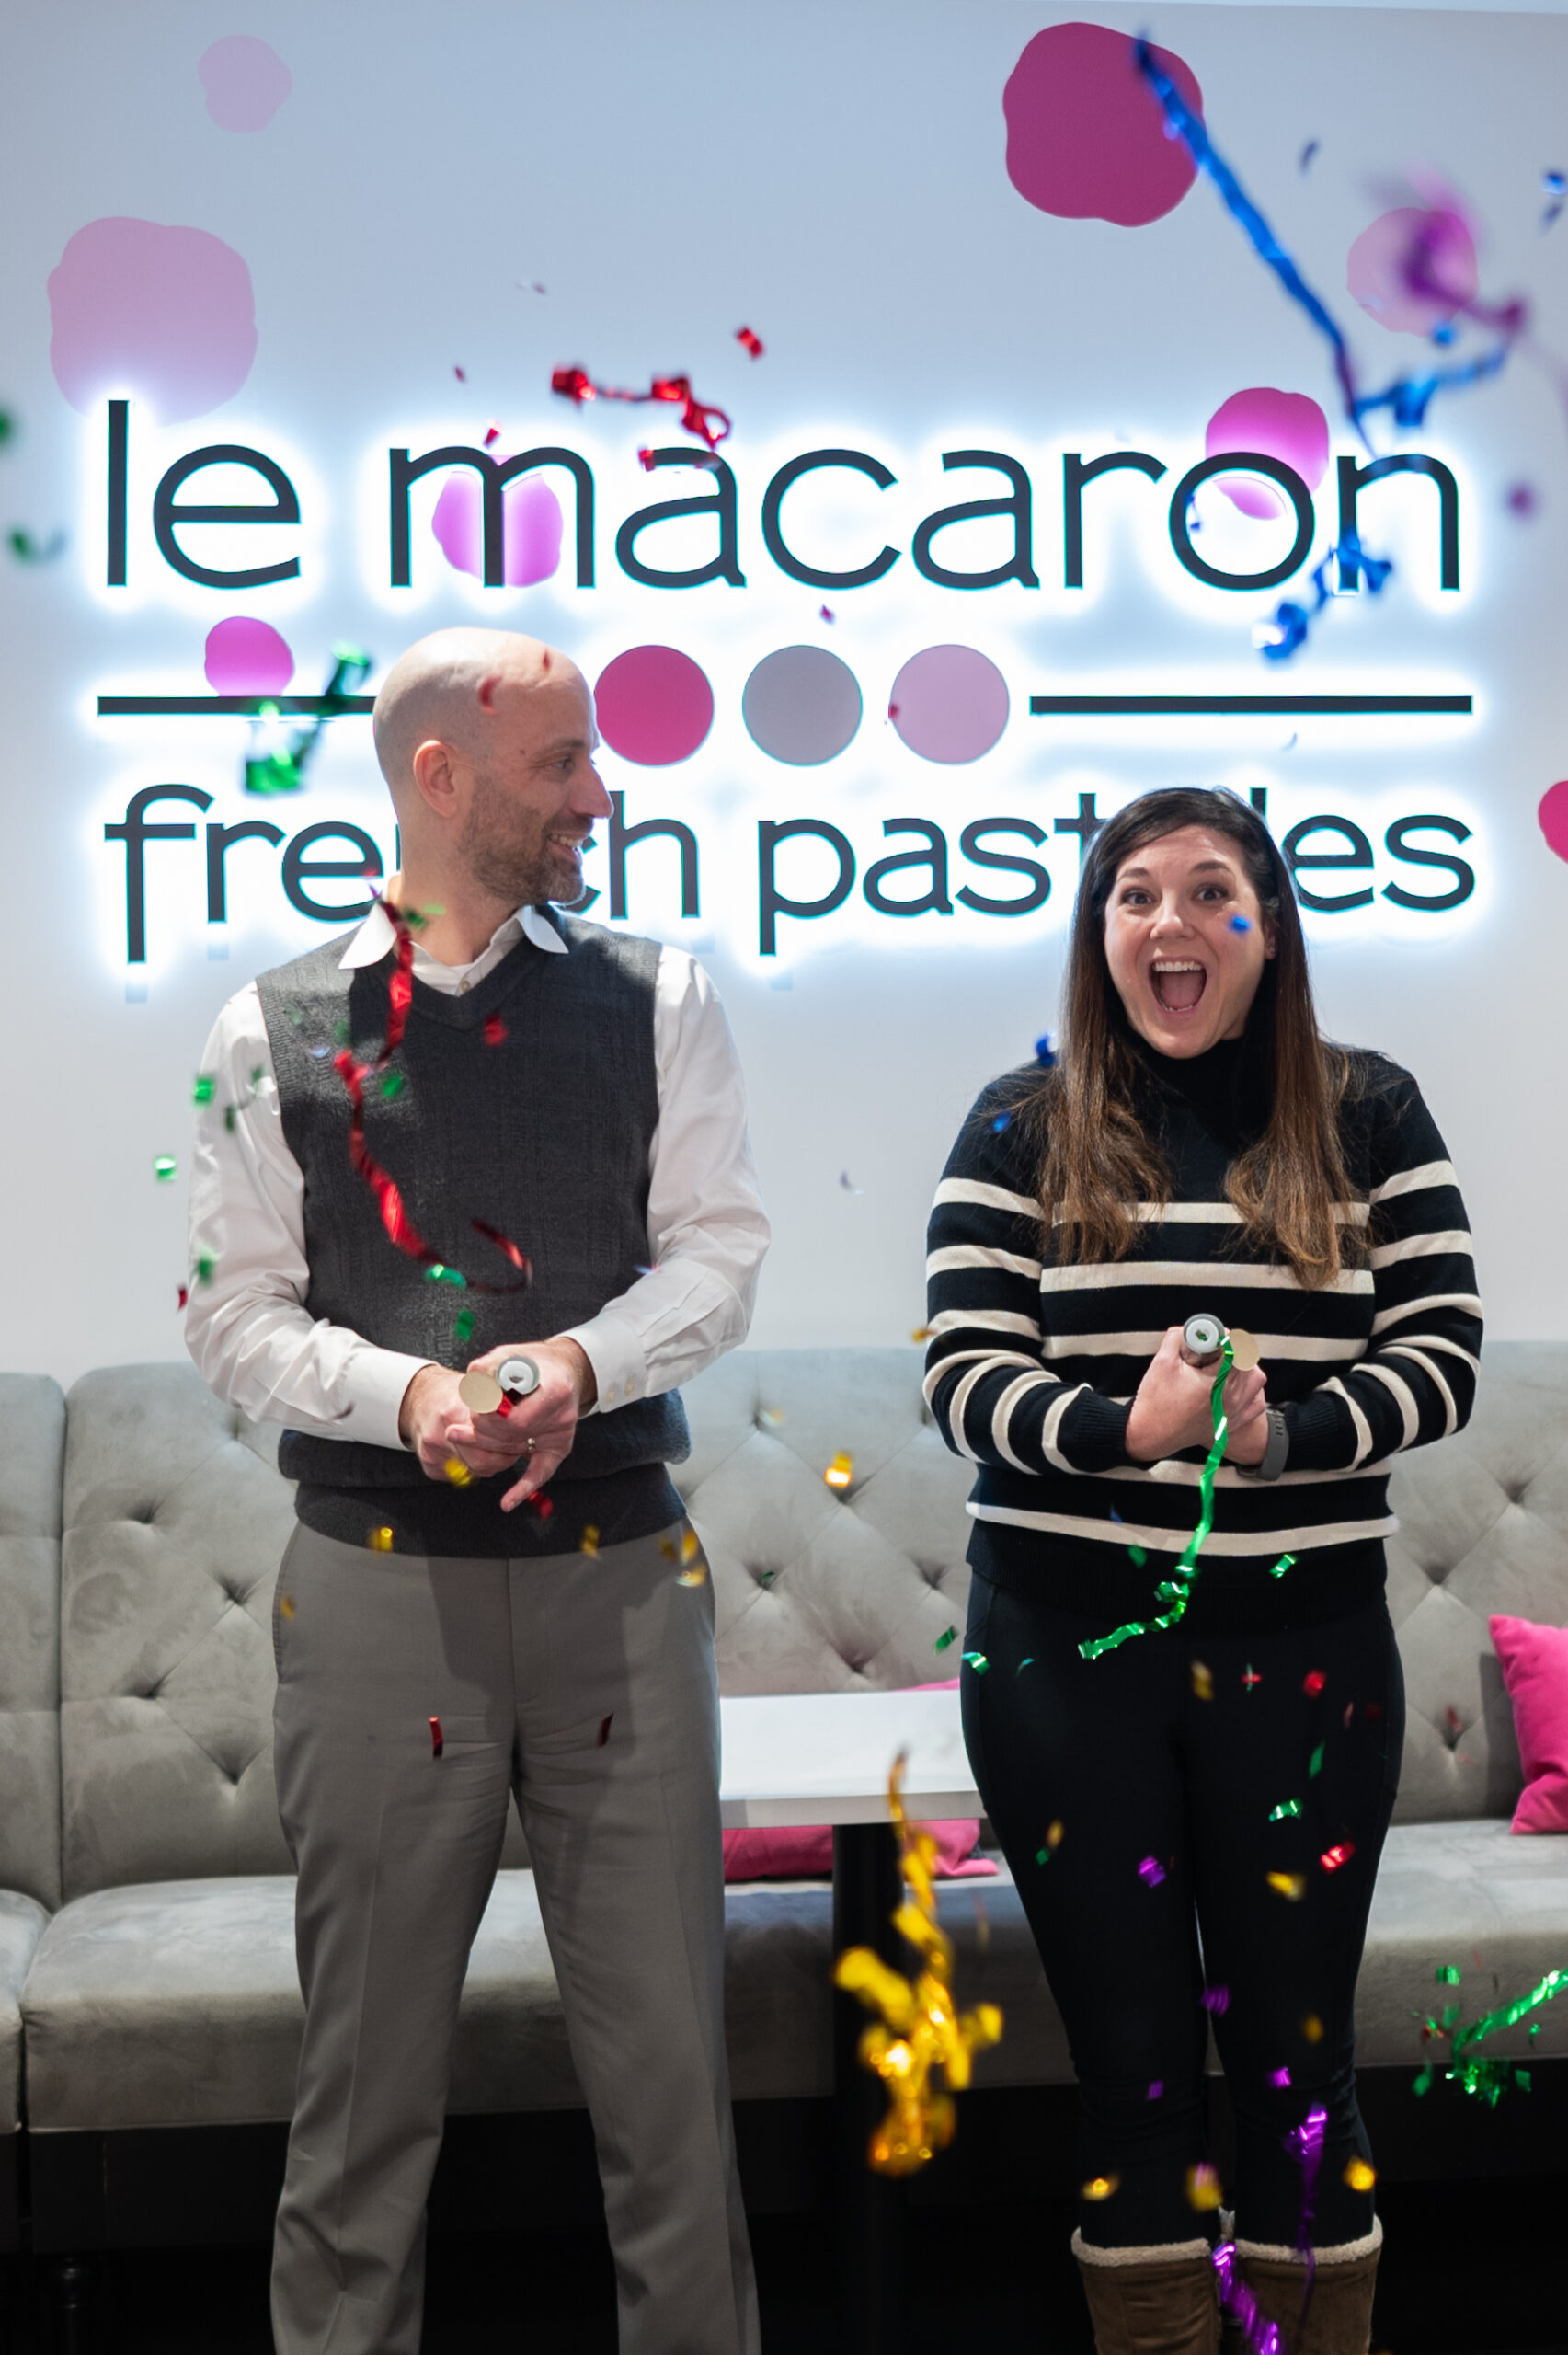 Le Macaron Fishers is celebrating its first birthday. Owners Aaron and Christi Parker have confetti to celebrate in front of the Le Macaron French Pastries sign in their cafe.